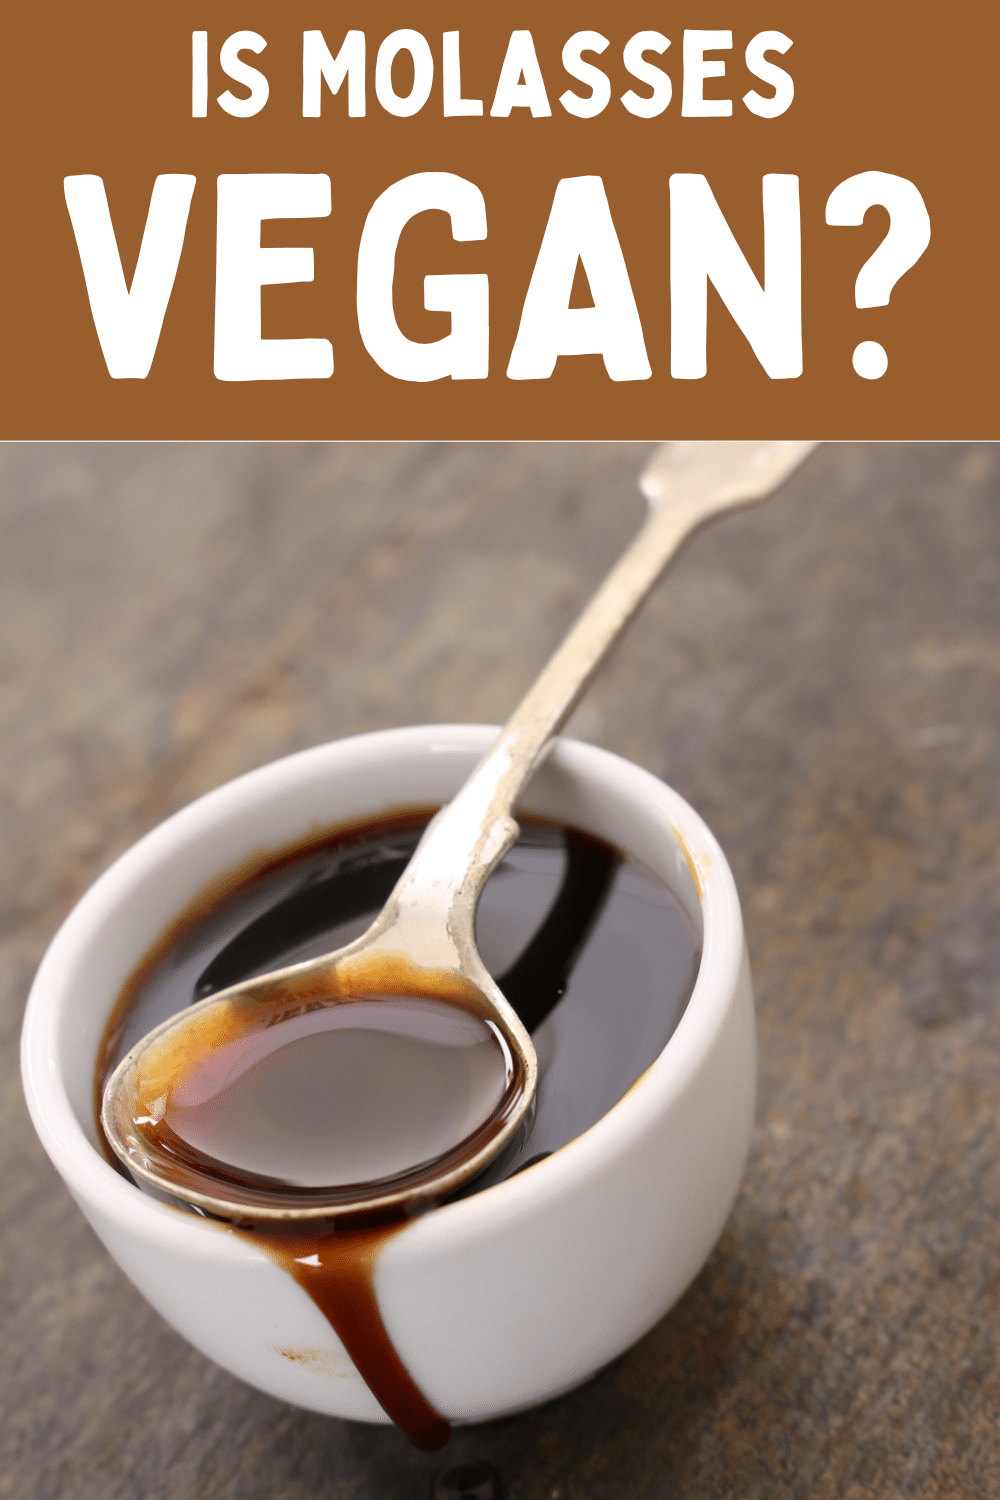 white bowl with brown liquid. silver spoon in bowl with brown liquid. text overlay: is molasses vegan